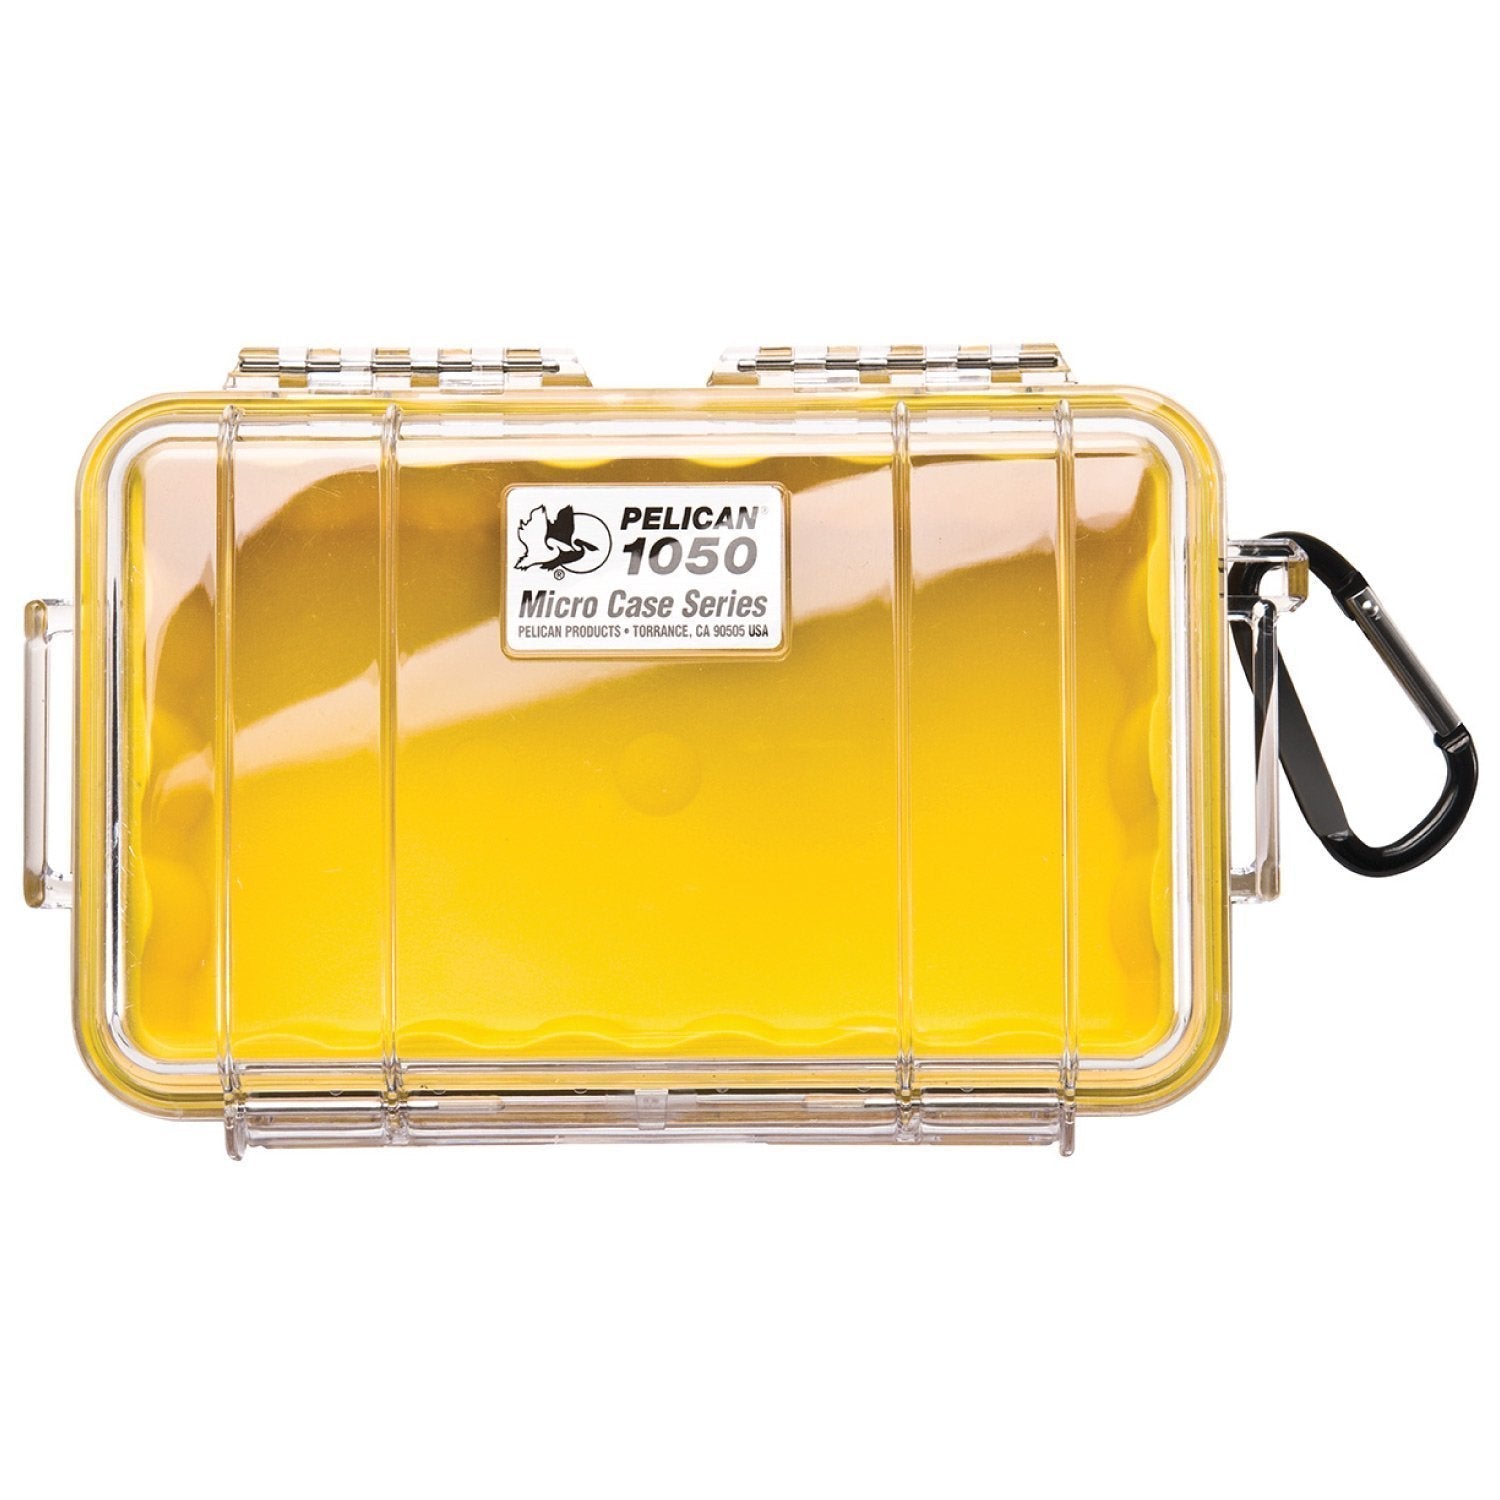 Pelican 1050 Micro Case Cases Pelican Products Clear Shell with Yellow Liner Tactical Gear Supplier Tactical Distributors Australia